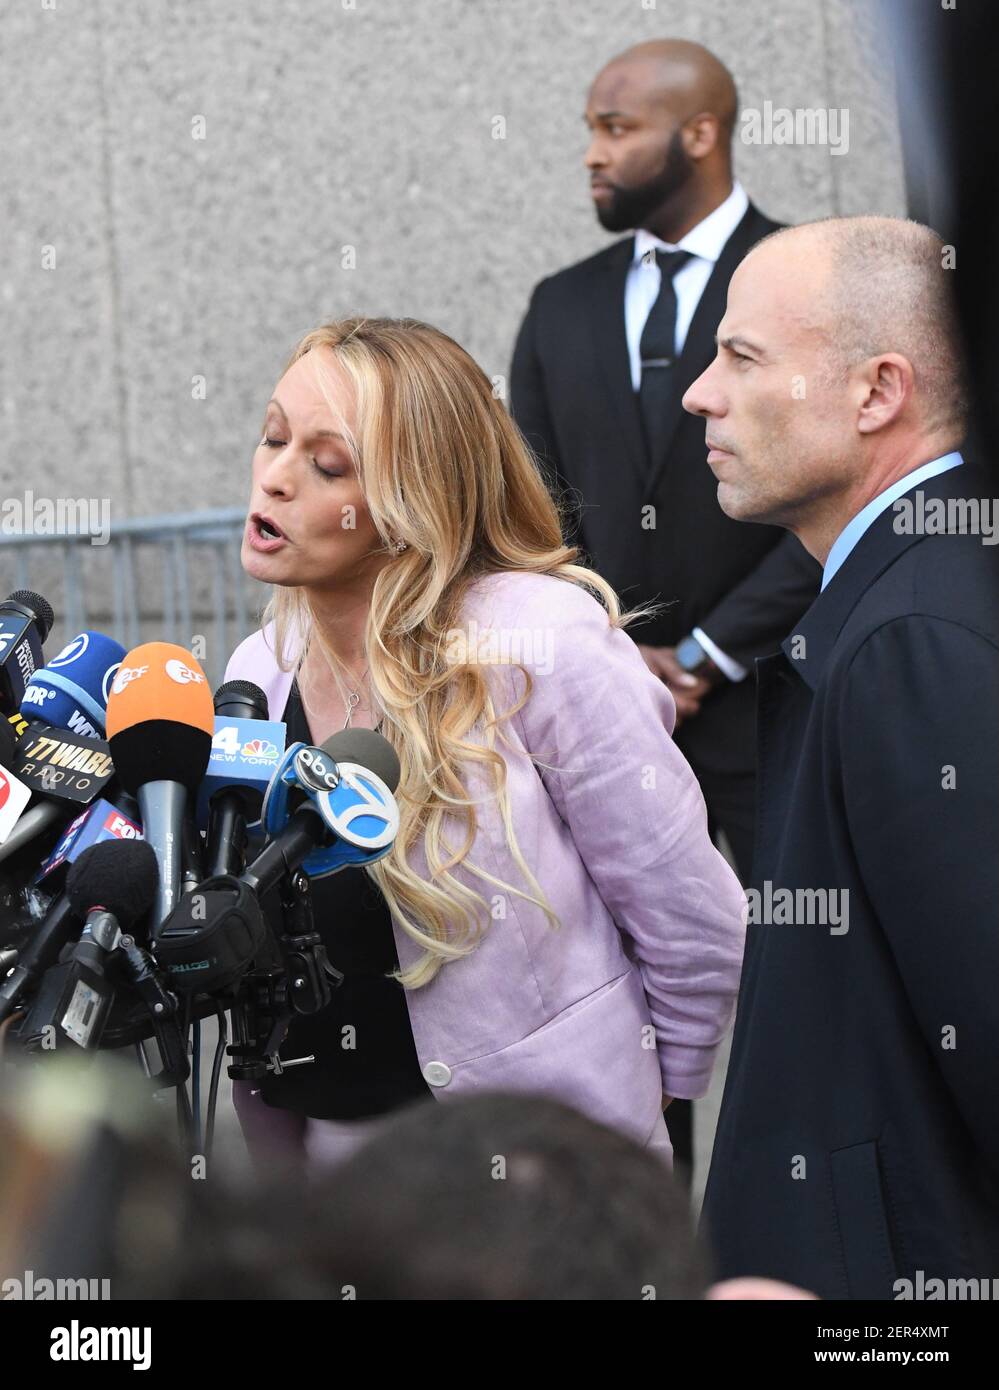 Stormy Daniels, whose real name is Stephanie Clifford, exits federal ...